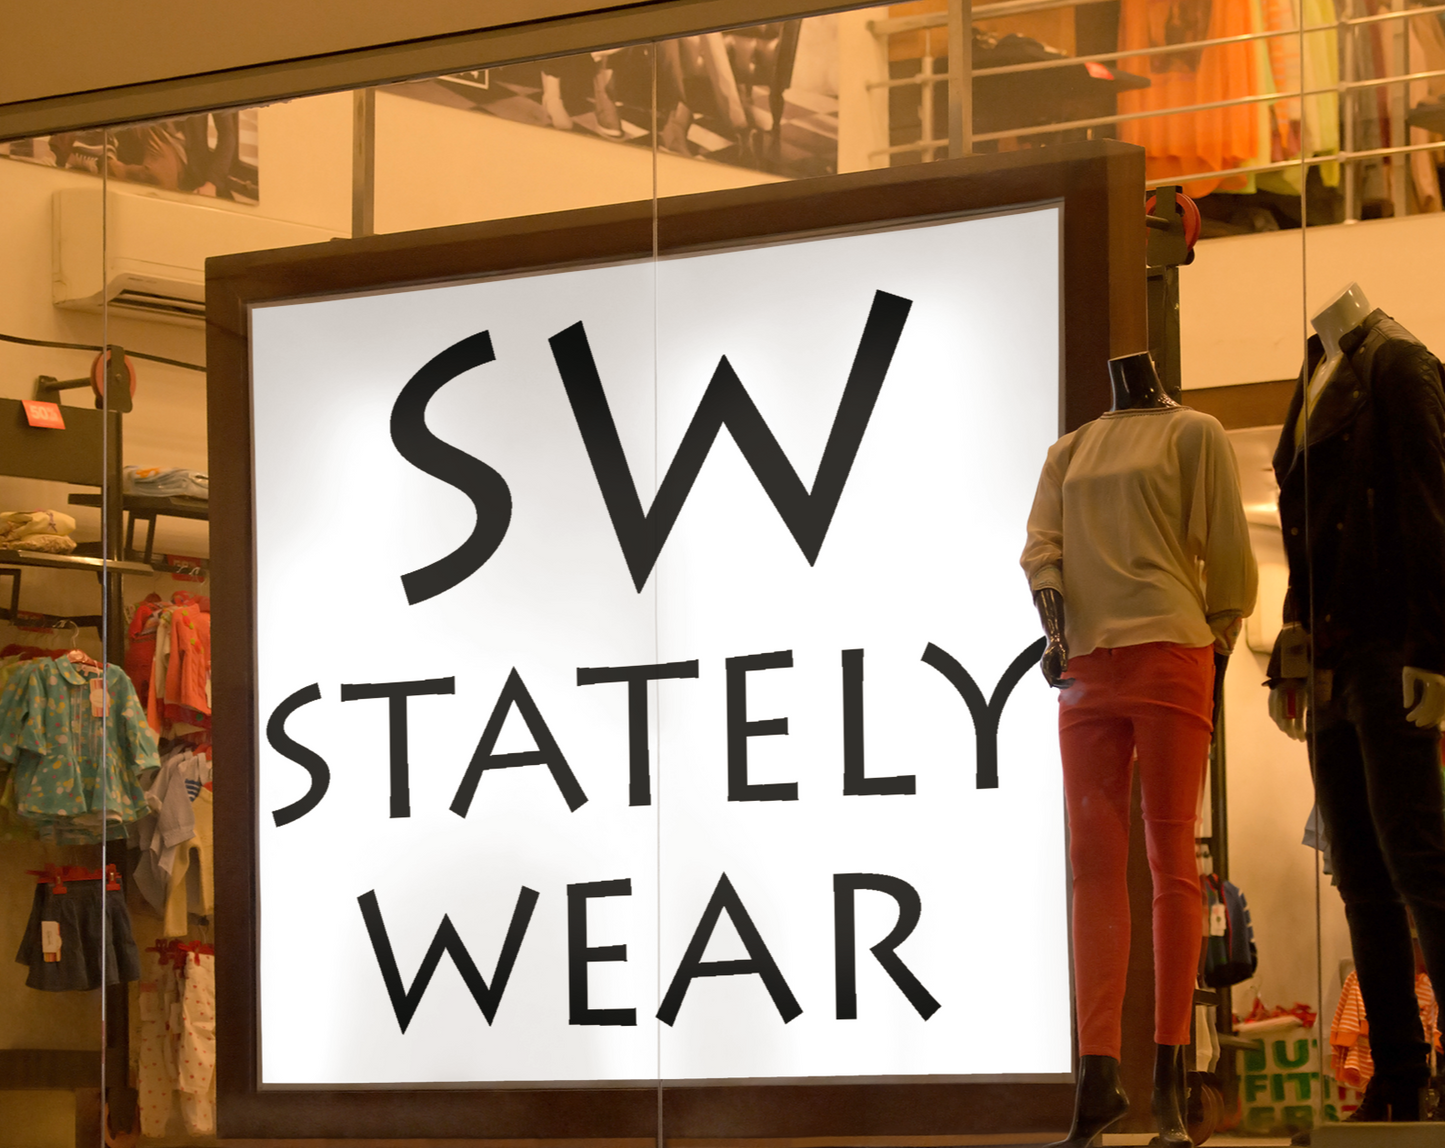 Stately Wear's window display for its flag hippie collection at Target stores.